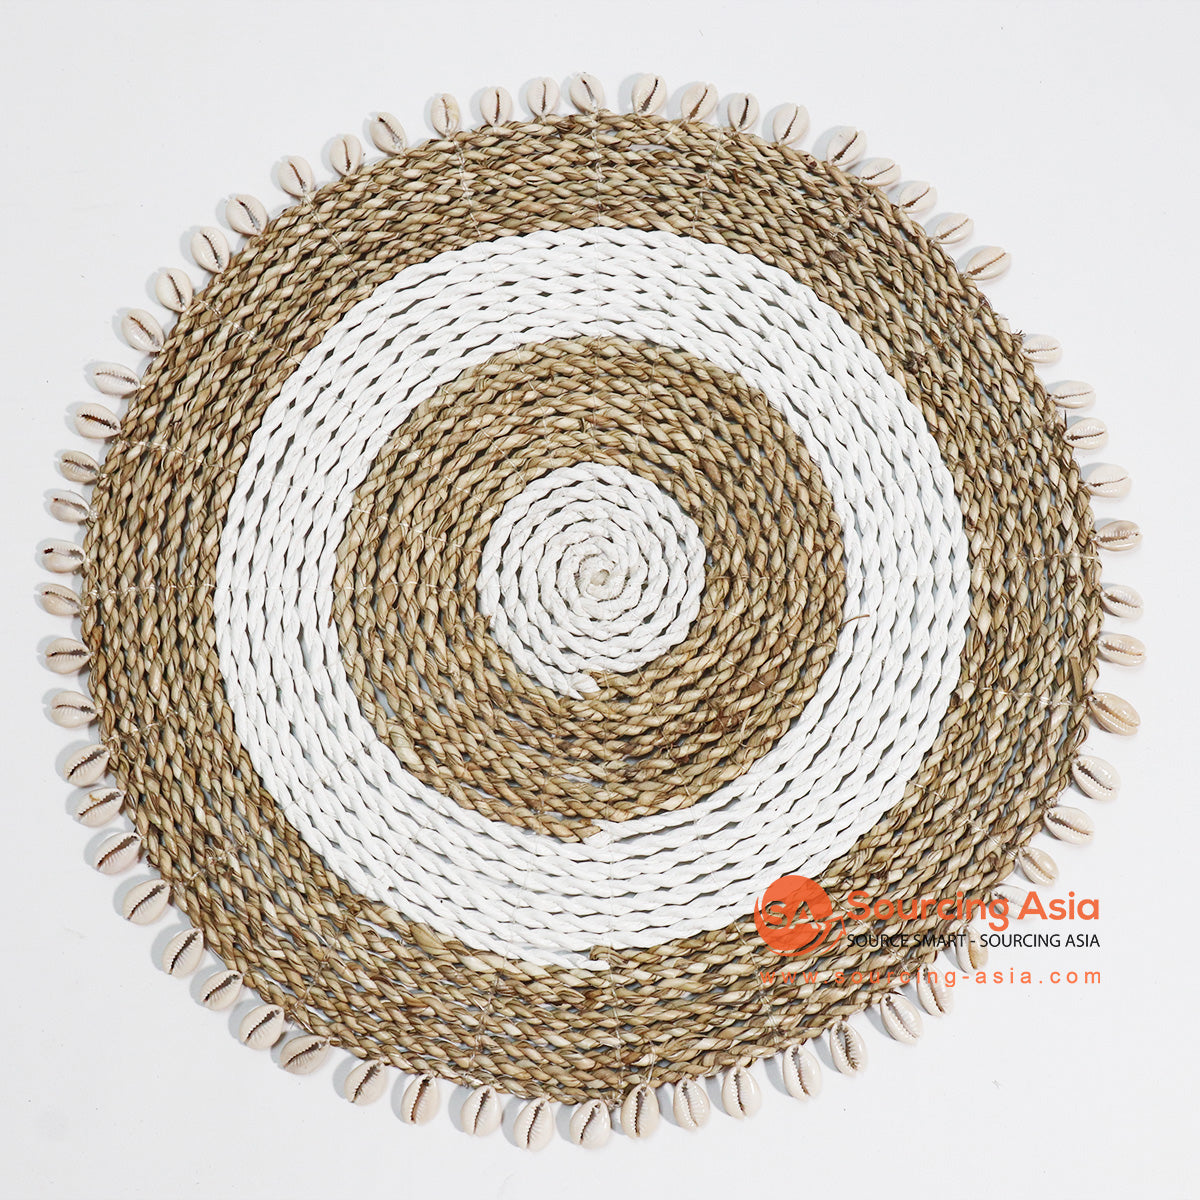 HBSC015-4 NATURAL AND WHITE SEA GRASS ROUND DECORATIVE PLACEMAT WITH SHELL